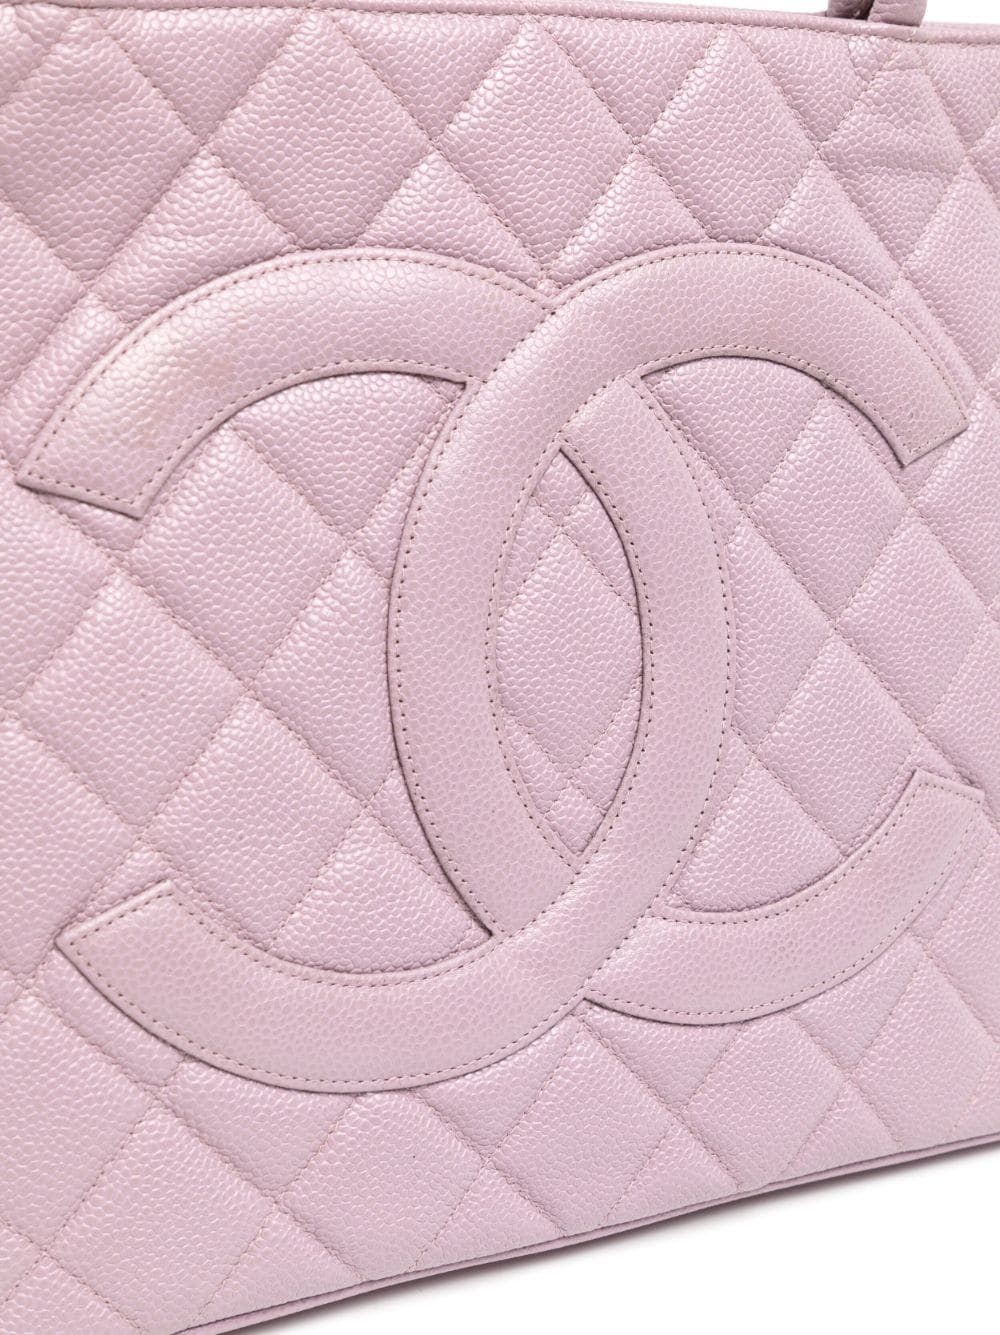 CHANEL PST Petit Shopping Caviar Leather Tote Bag Pink